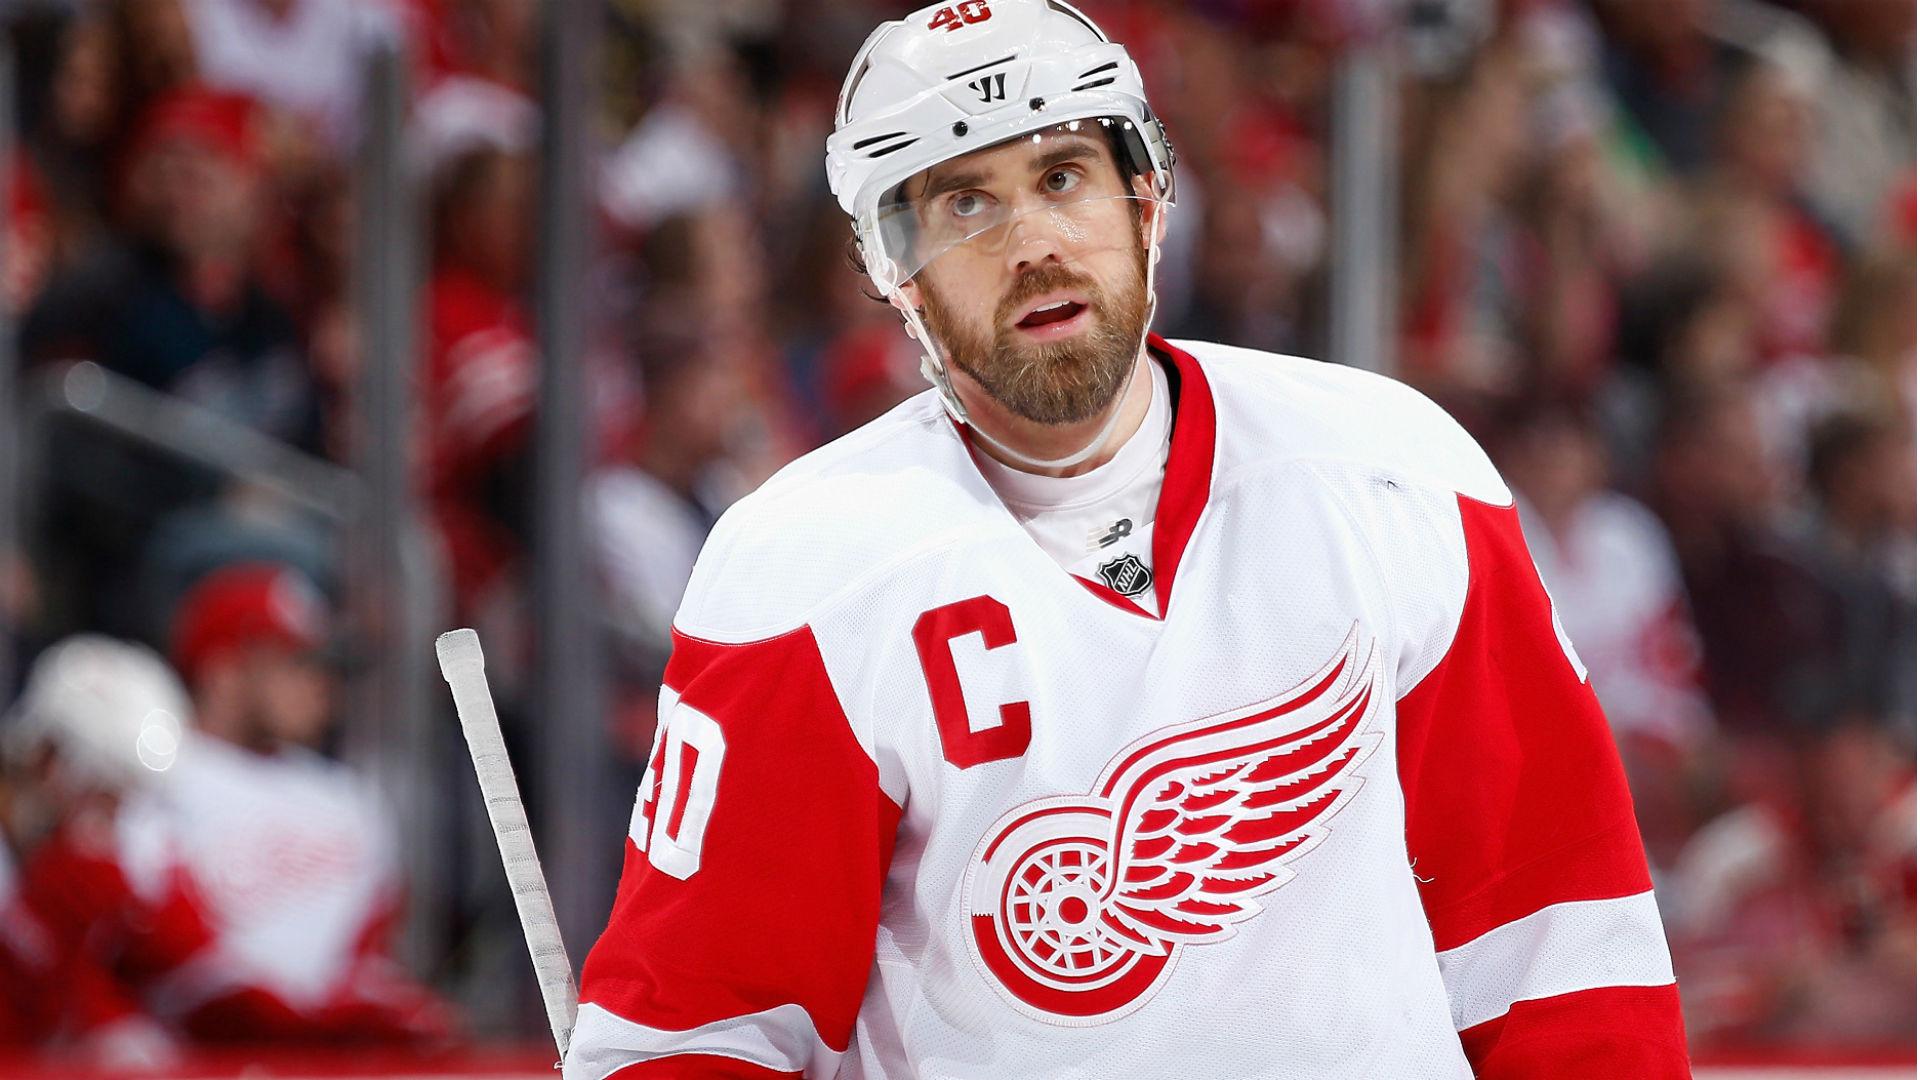 Red Wings' Henrik Zetterberg: 'I'm not 100 percent' after hit to